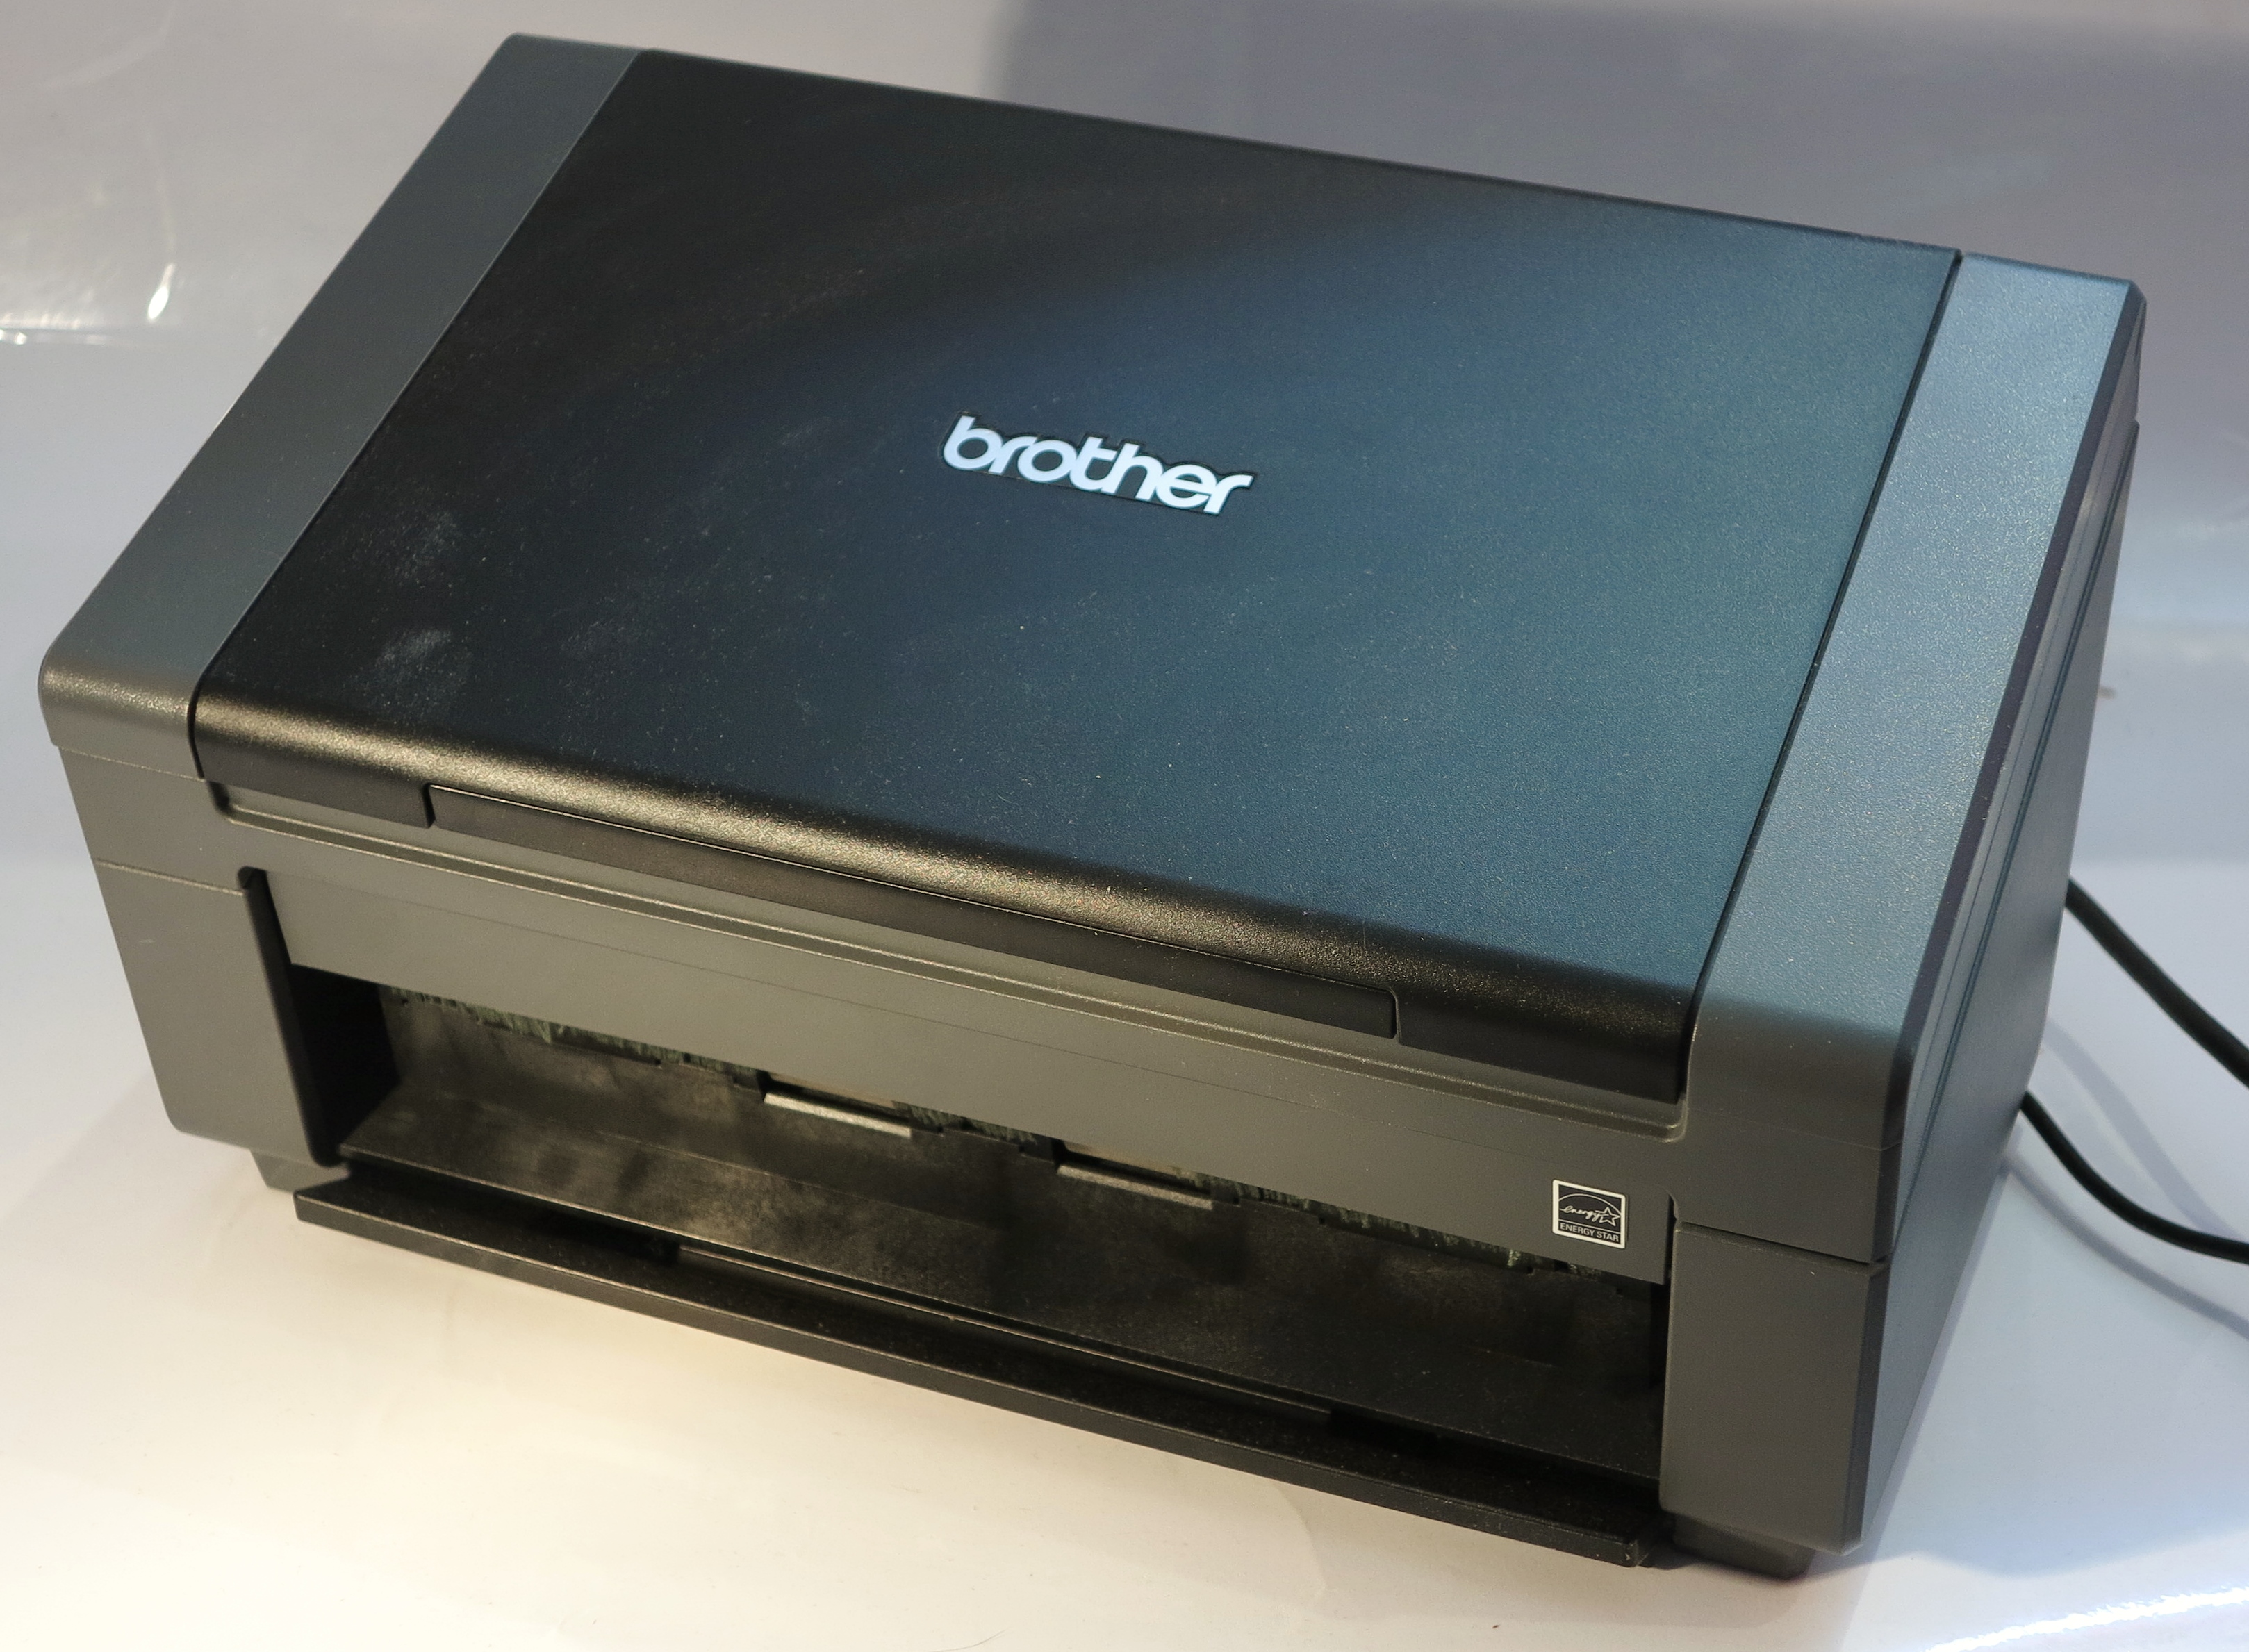 Product Review–Brother PDS-6000 document scanner